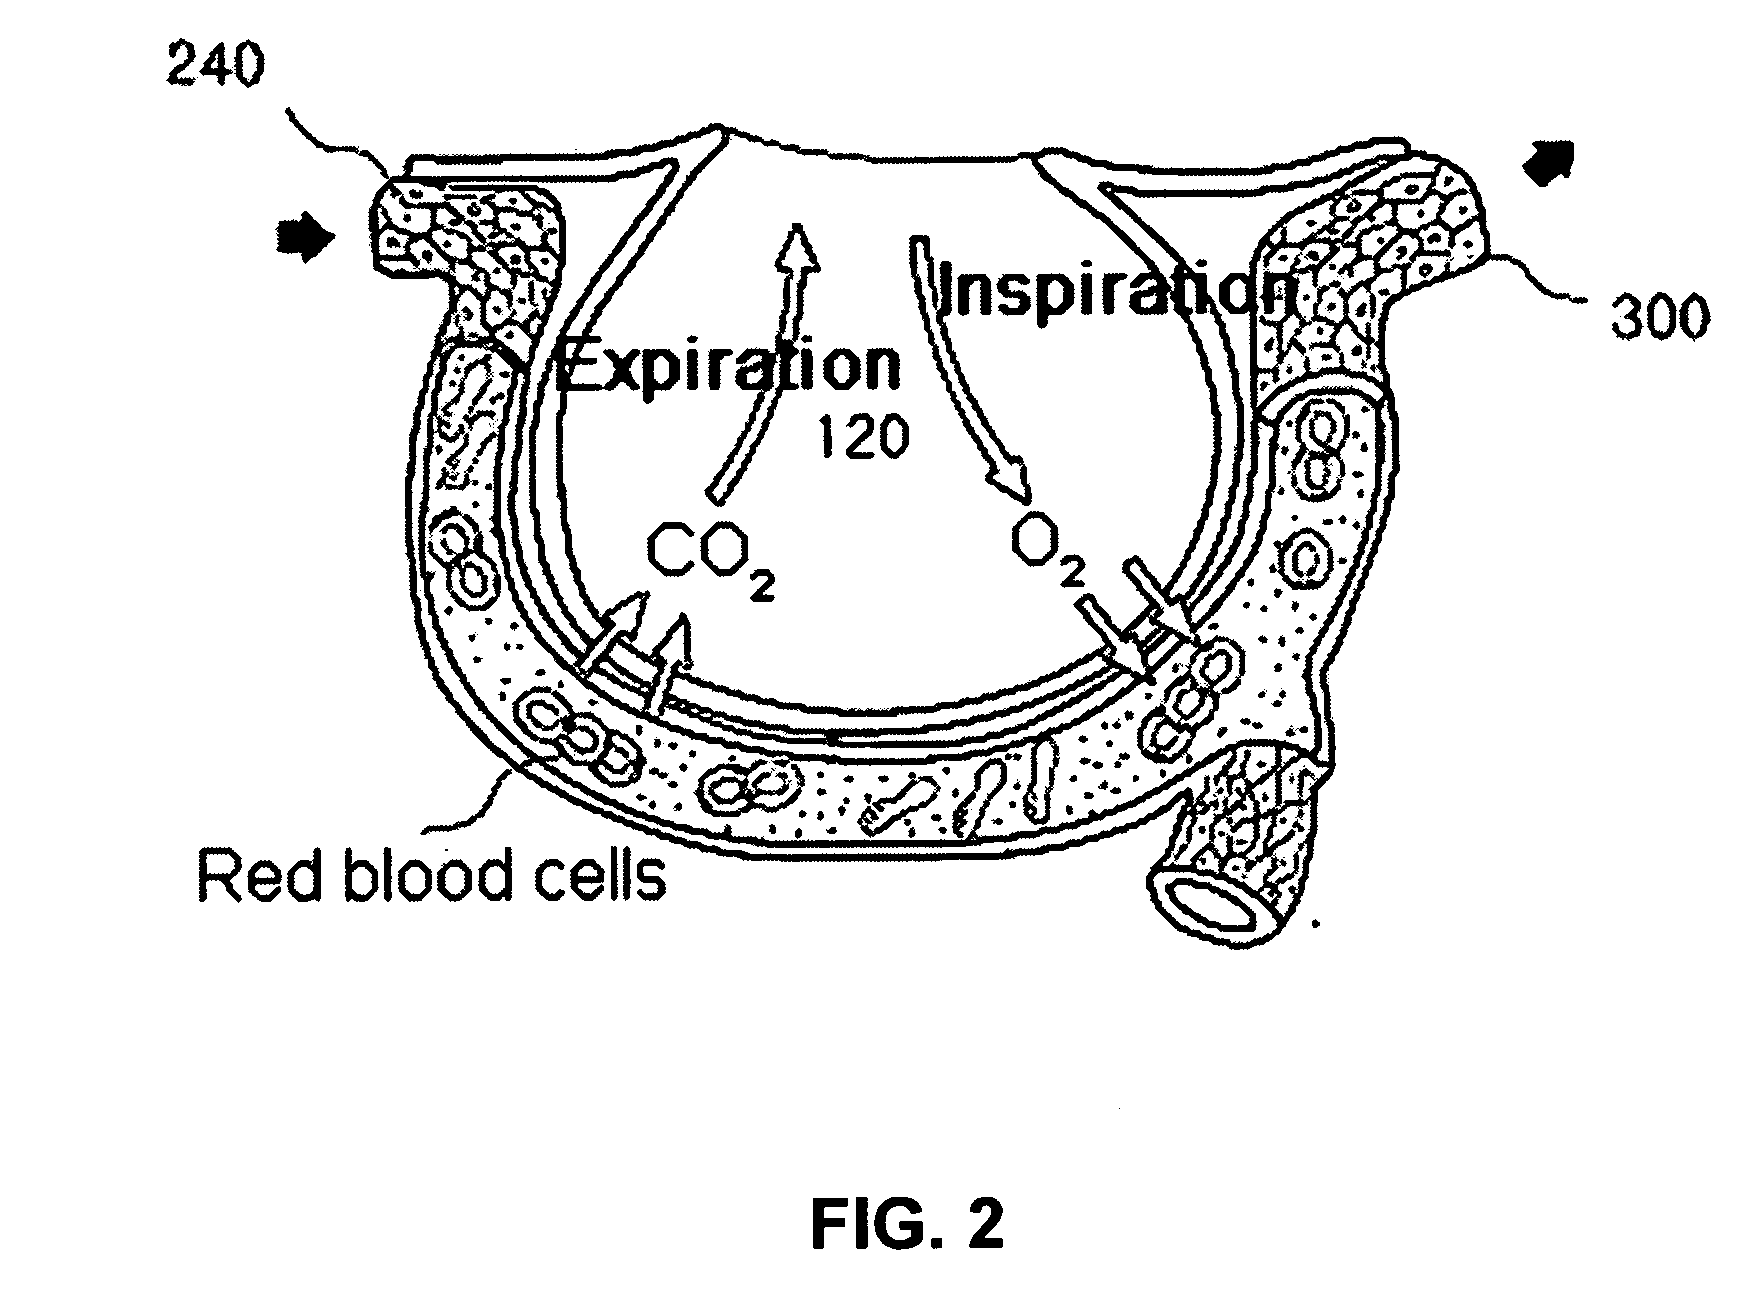 Method and display apparatus for non-invasively determining pulmonary characteristics by measuring breath gas and blood gas